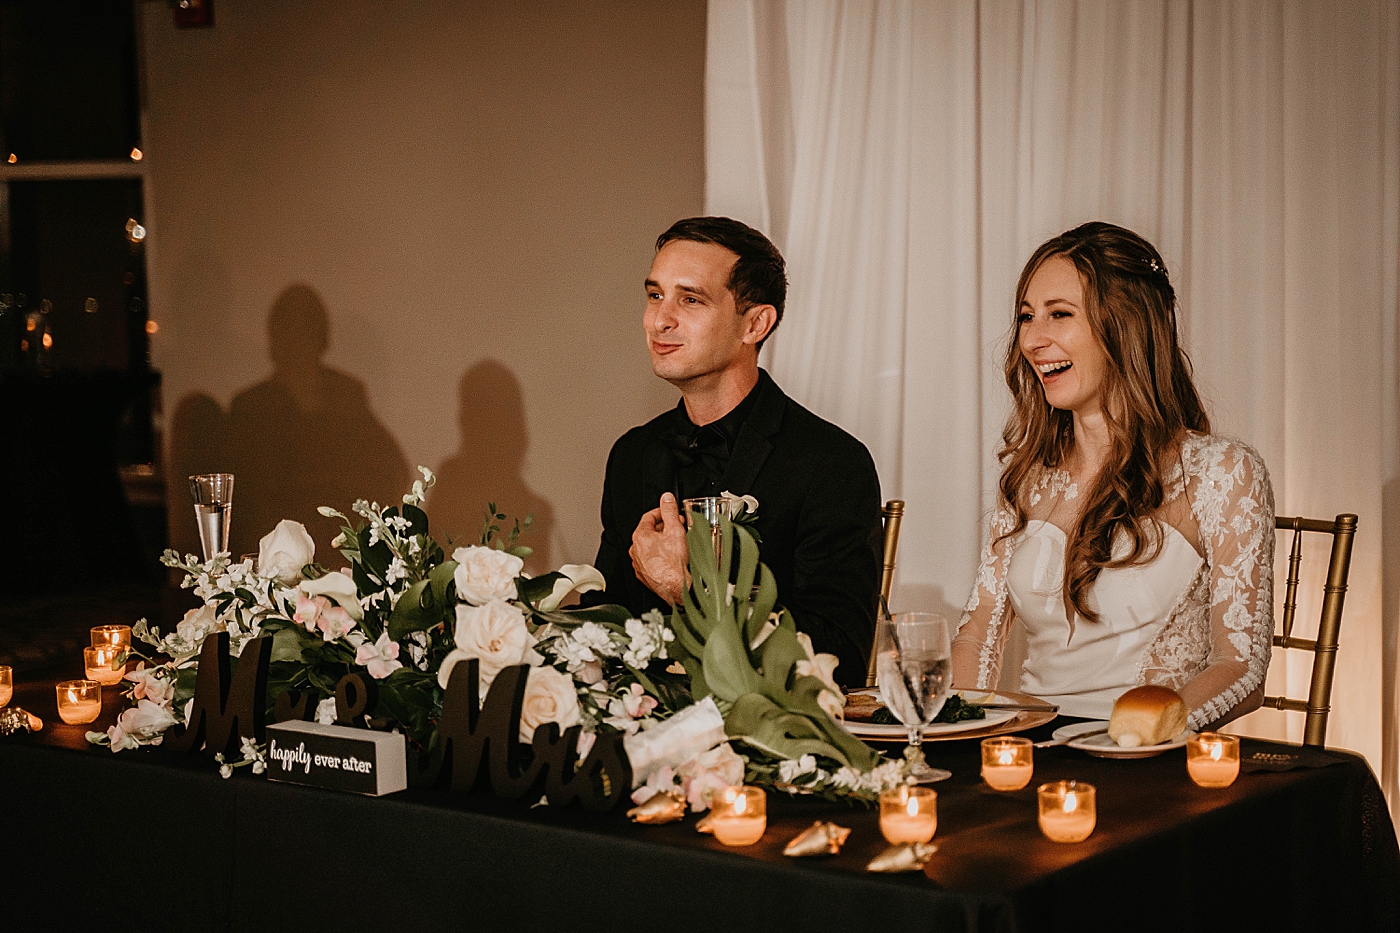 Floral Sweetheart table with happy Bride and Groom Waterstone Resort and Marina Wedding captured by South Florida Wedding Photographer Krystal Capone Photography